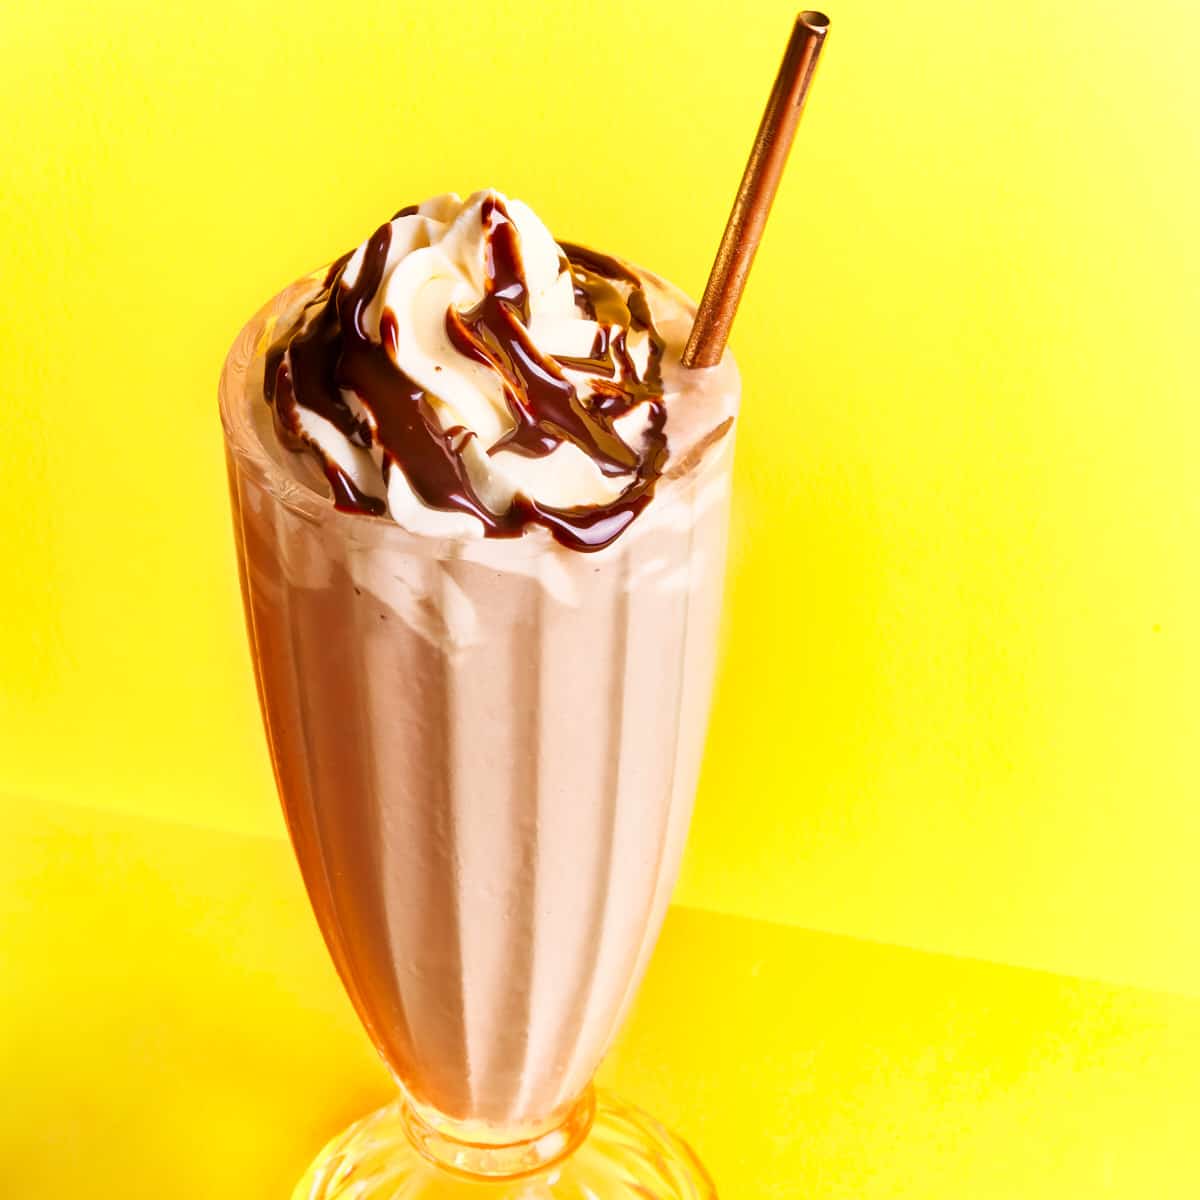 Chocolate milkshake in a glass topped with whipped cream and chocolate syrup